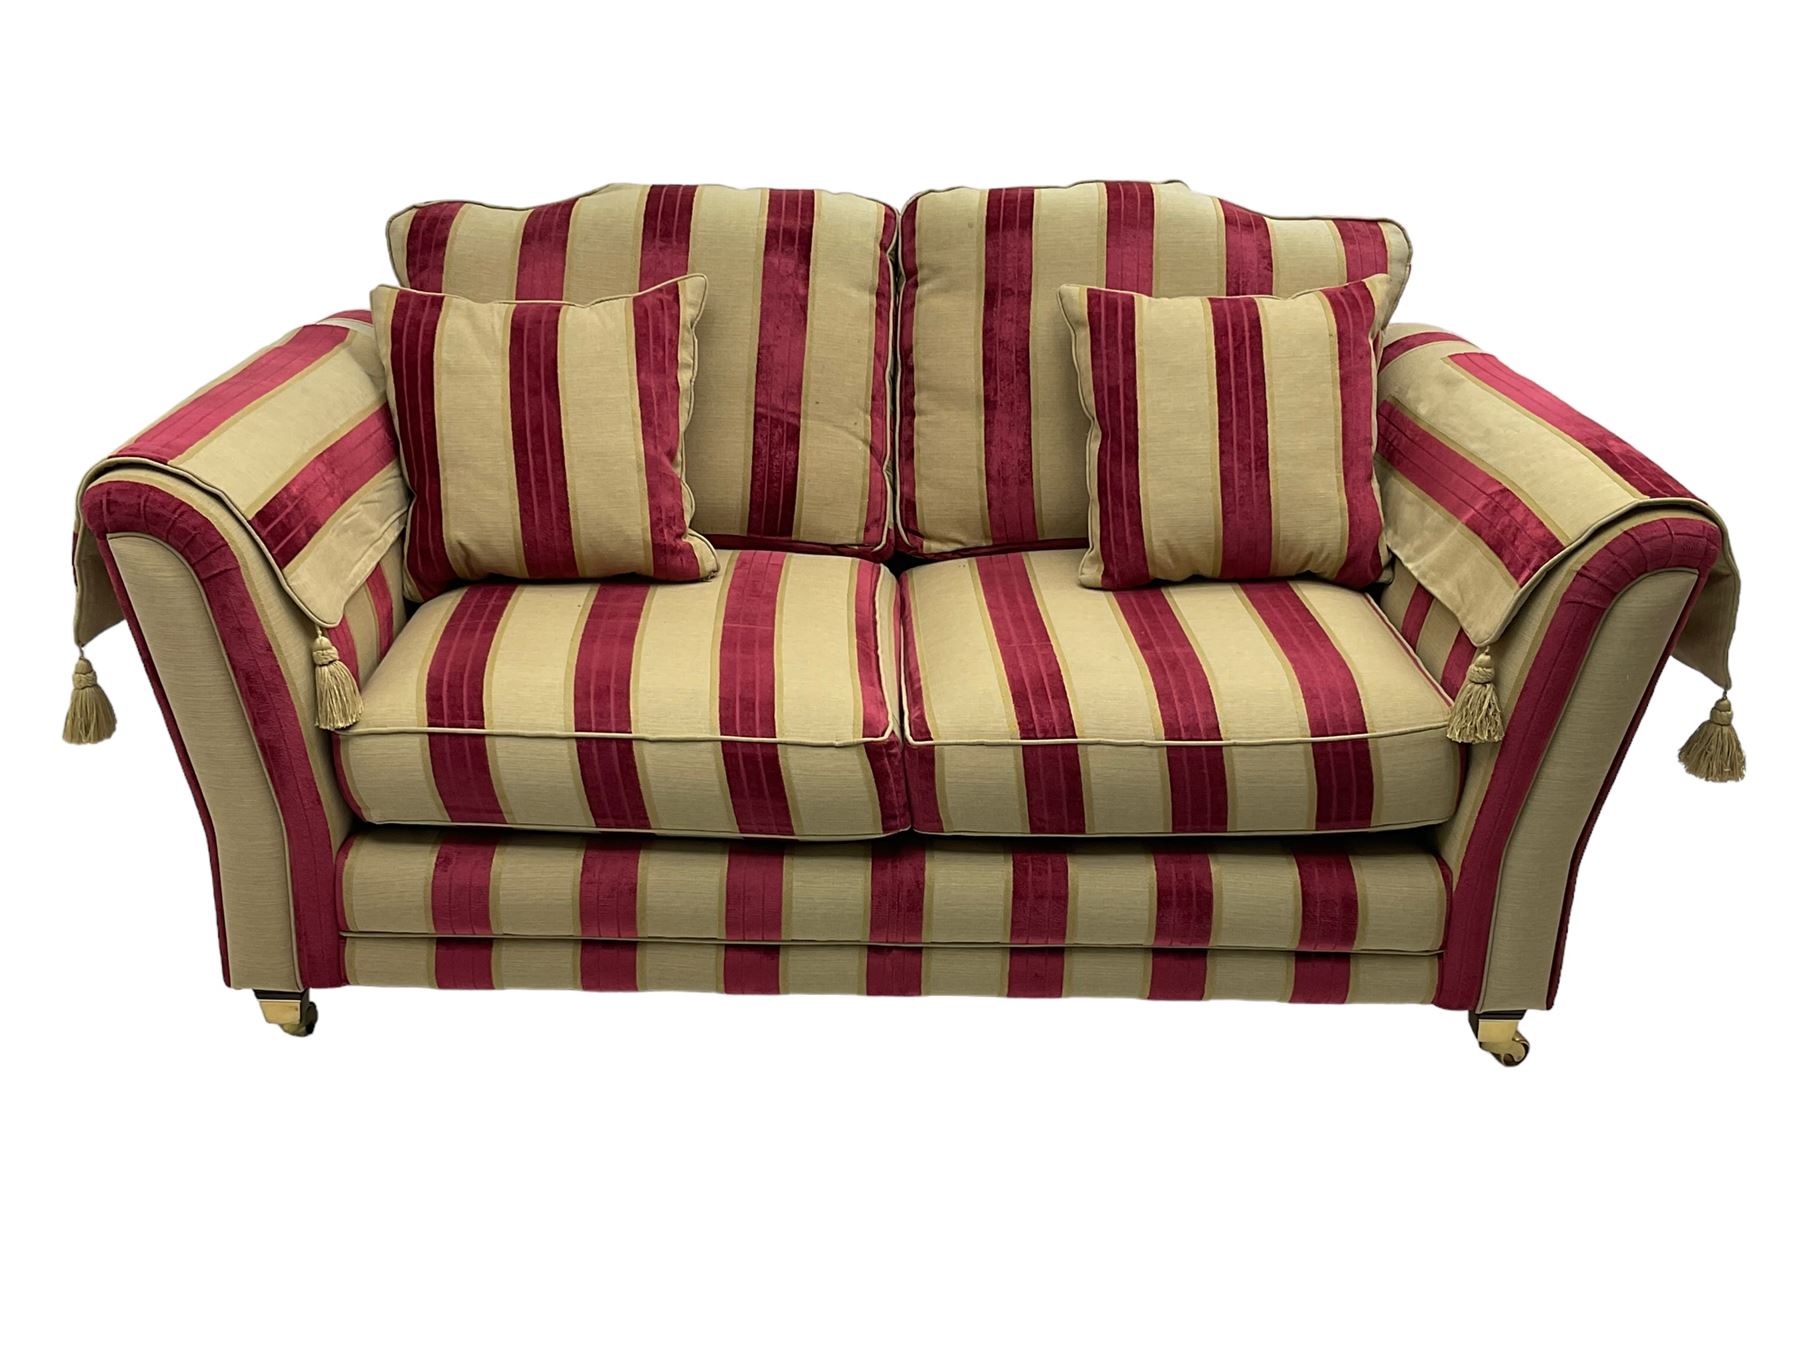 Three-piece lounge suite - large two-seat sofa upholstered in red and gold striped fabric (W185cm - Bild 16 aus 24